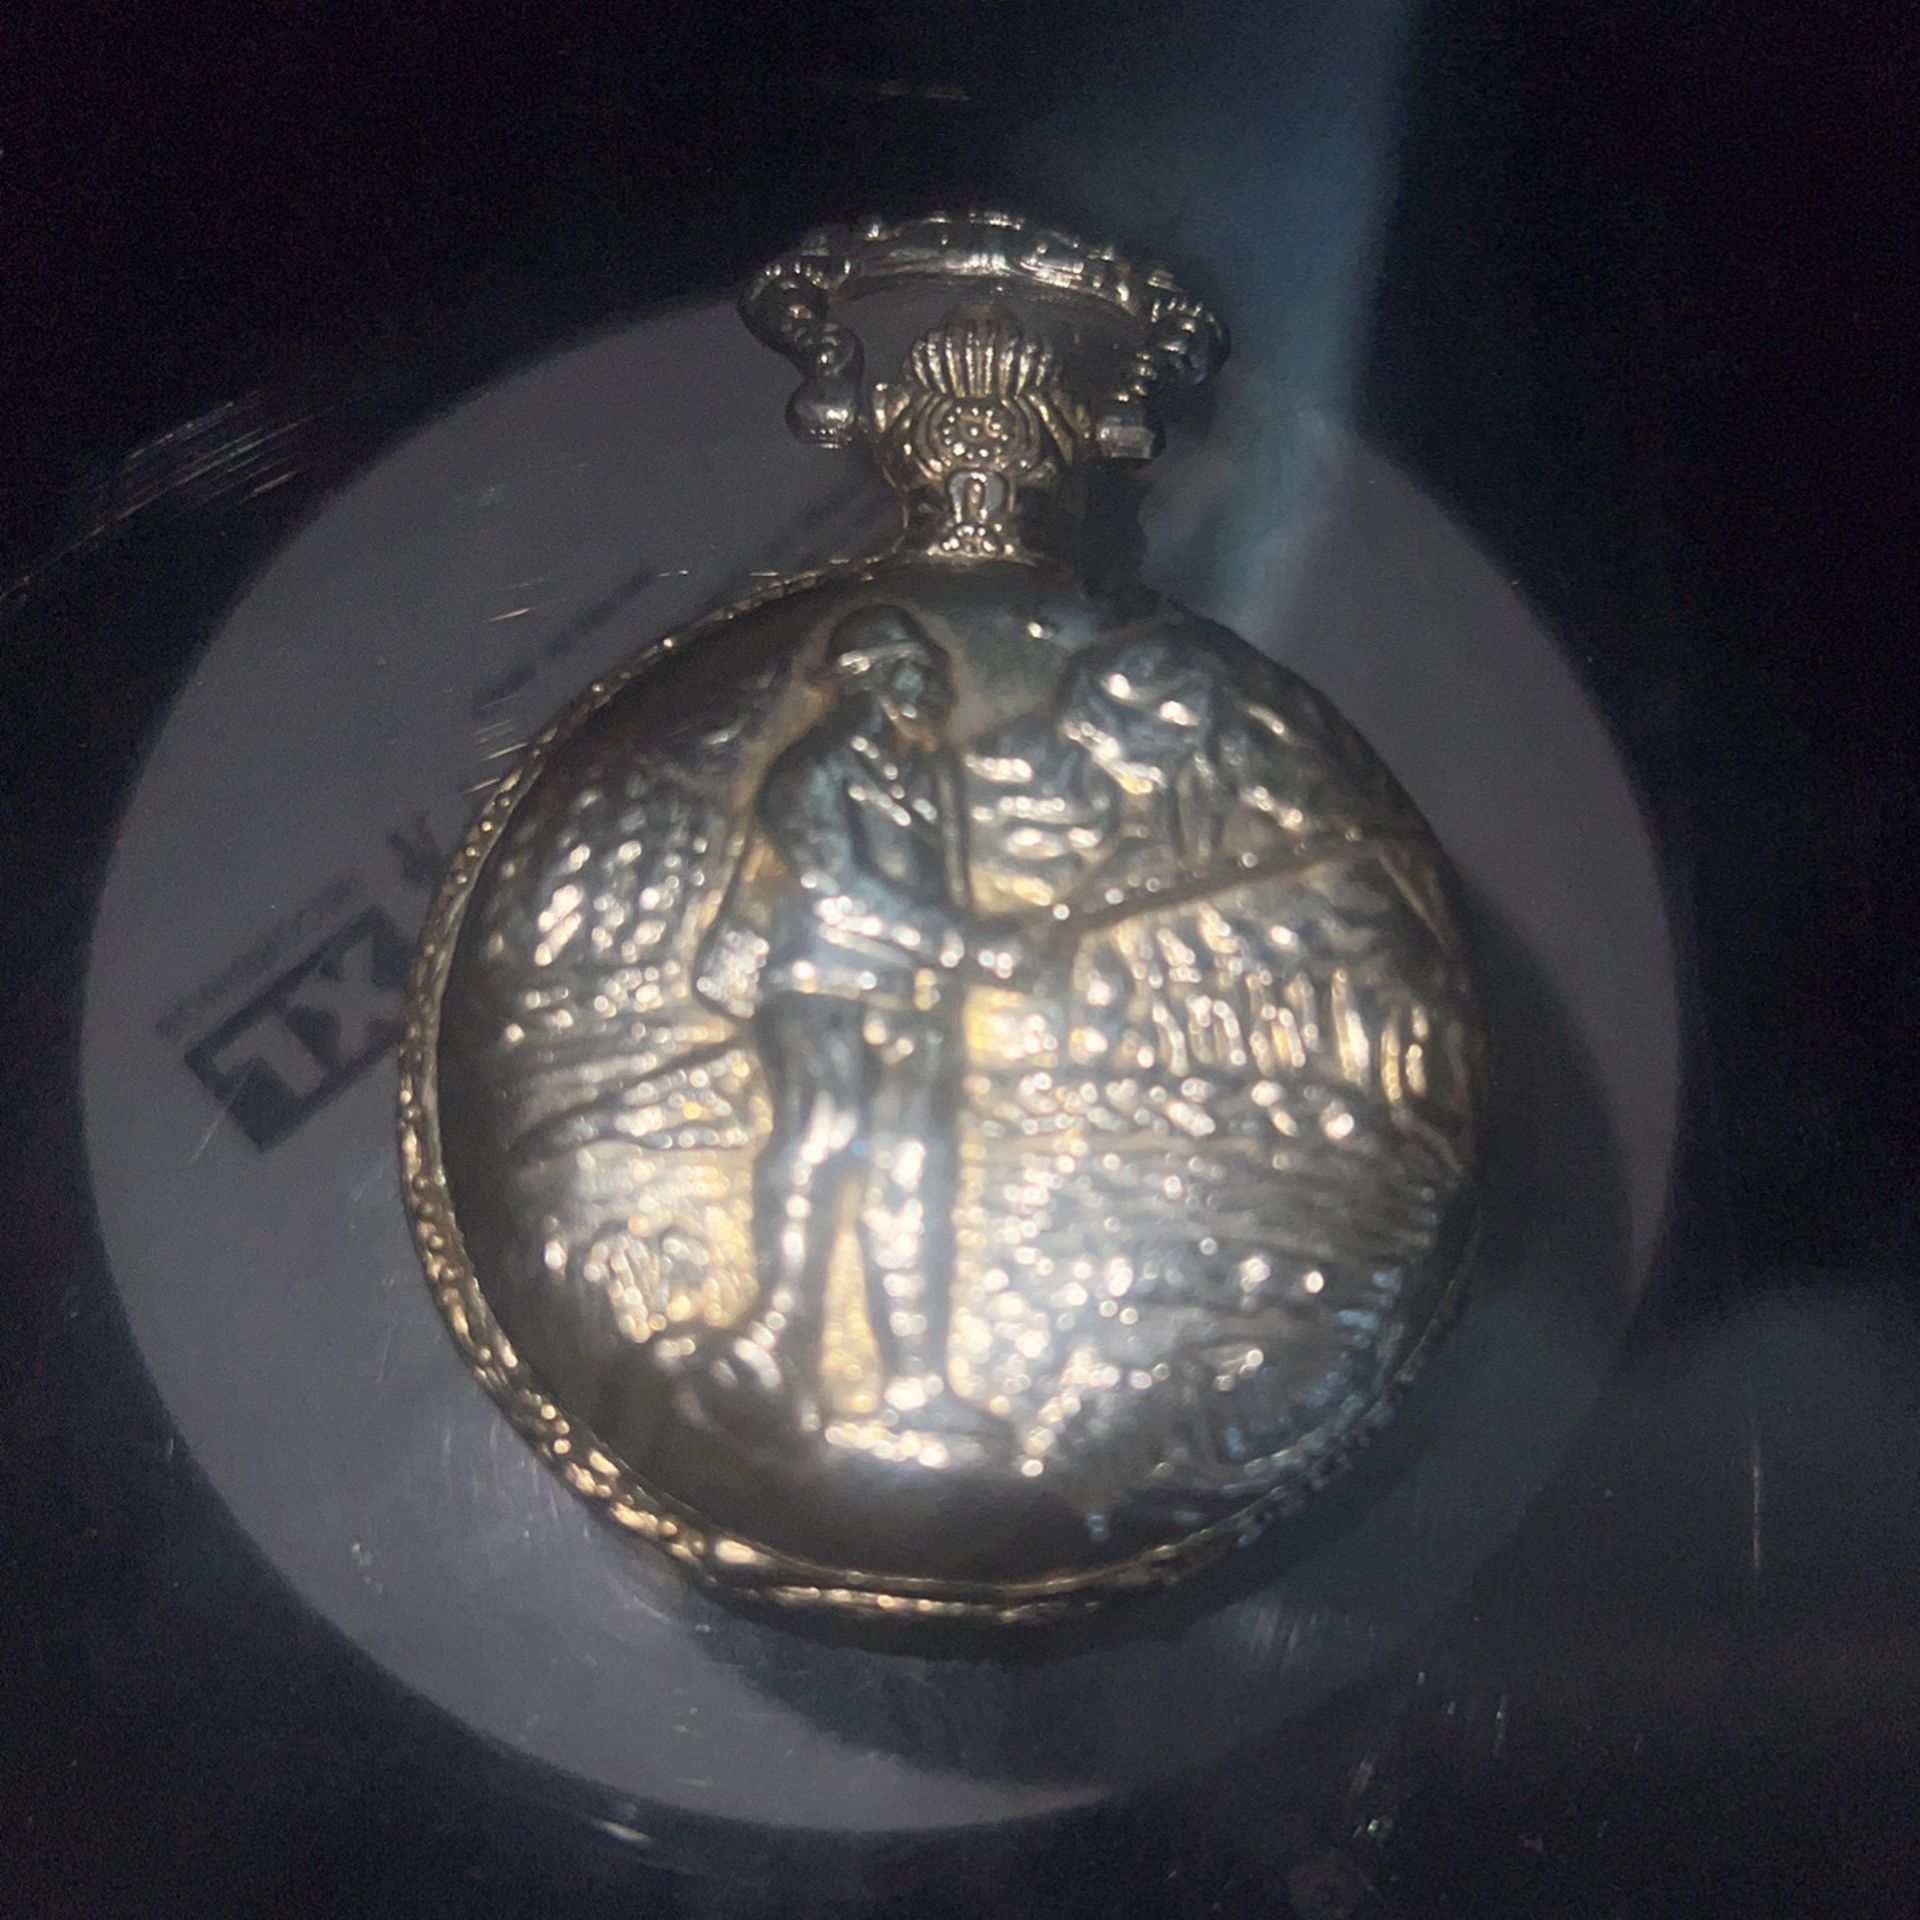 Old Pocket Watch